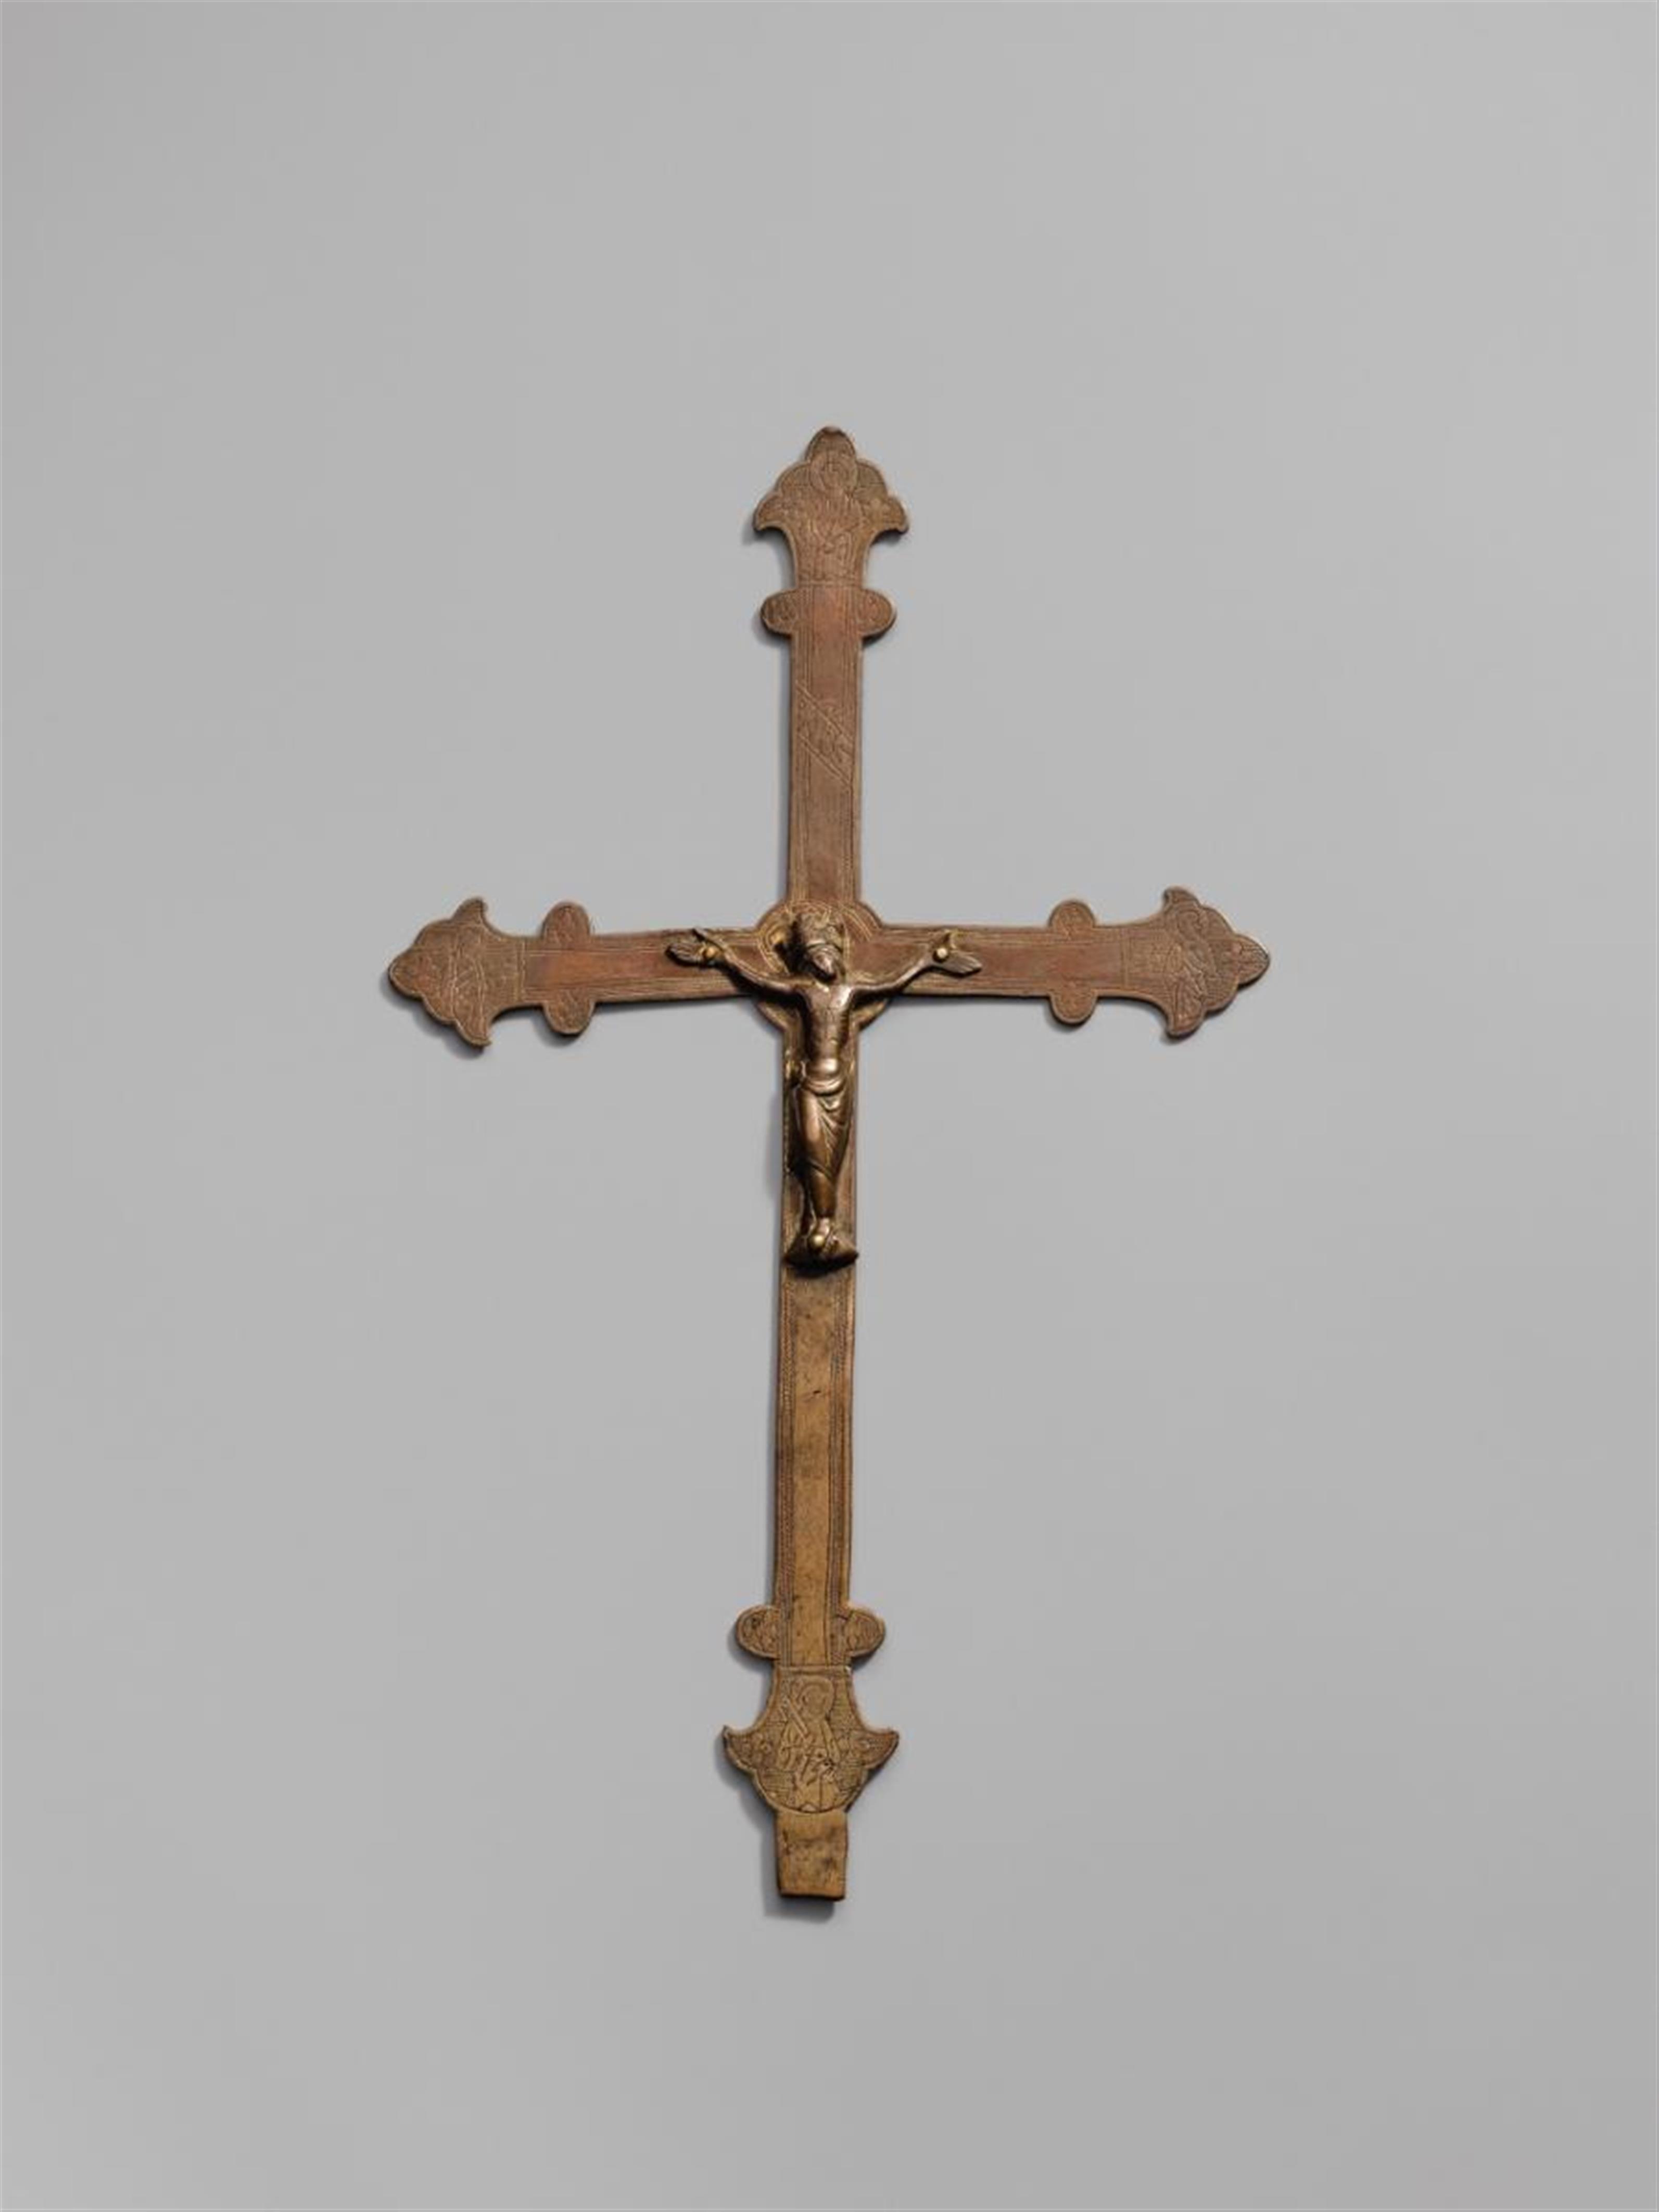 Limoges 1st half 13th century - A Limoges copper figure of Christ on the cross, first half 13th century. - image-1